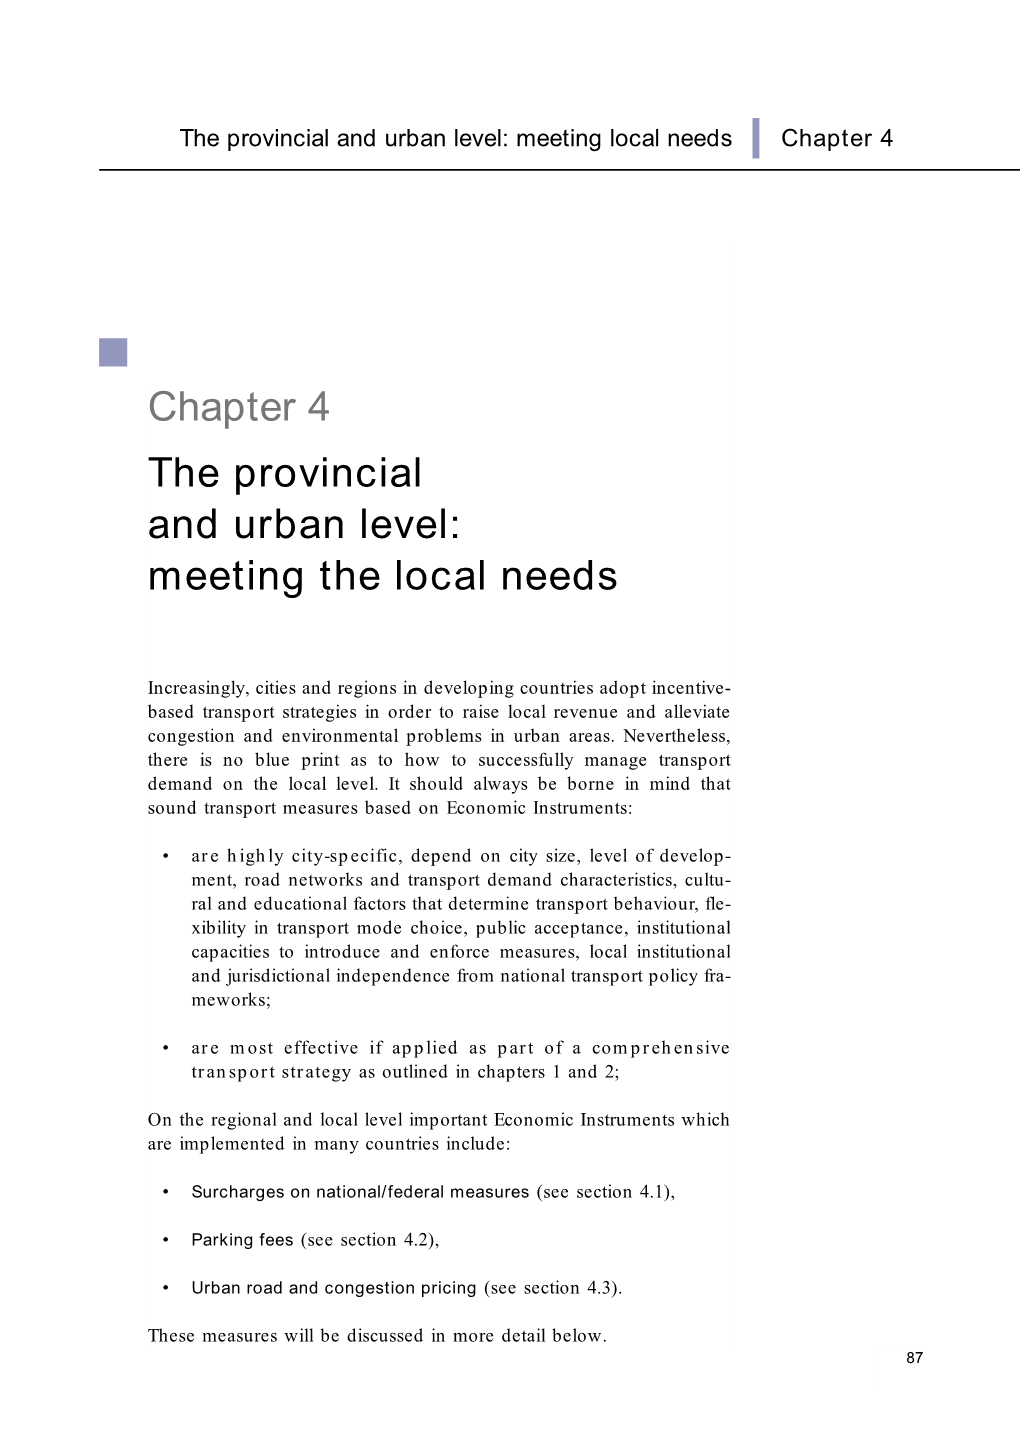 Chapter 4 the Provincial and Urban Level: Meeting the Local Needs